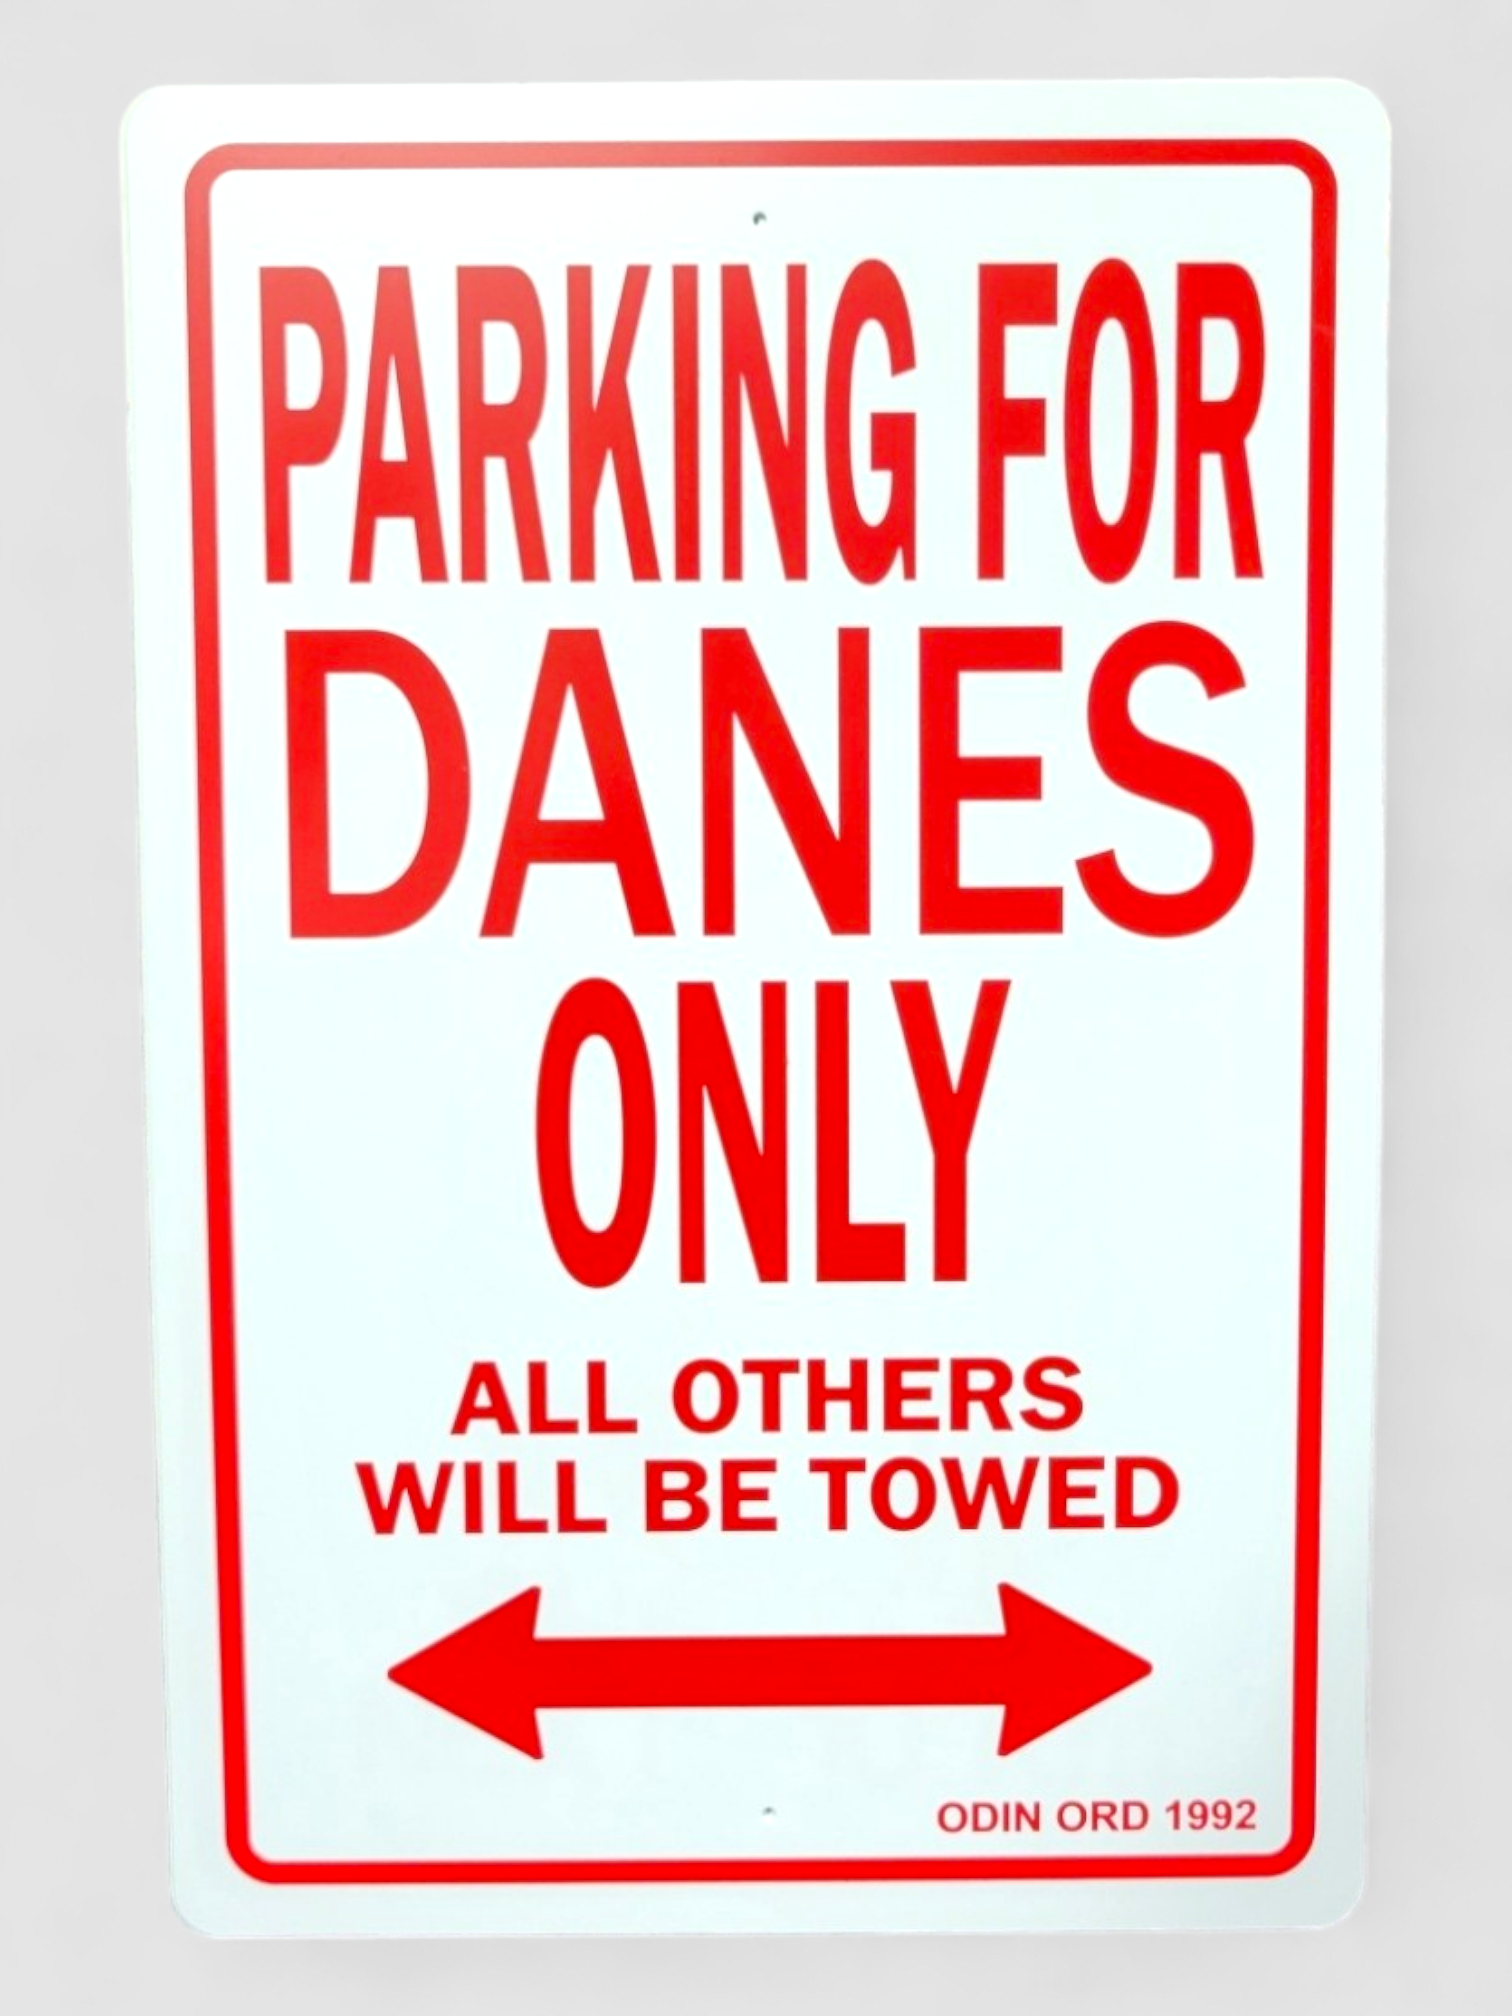 Sign: "Parking for Danes Only"